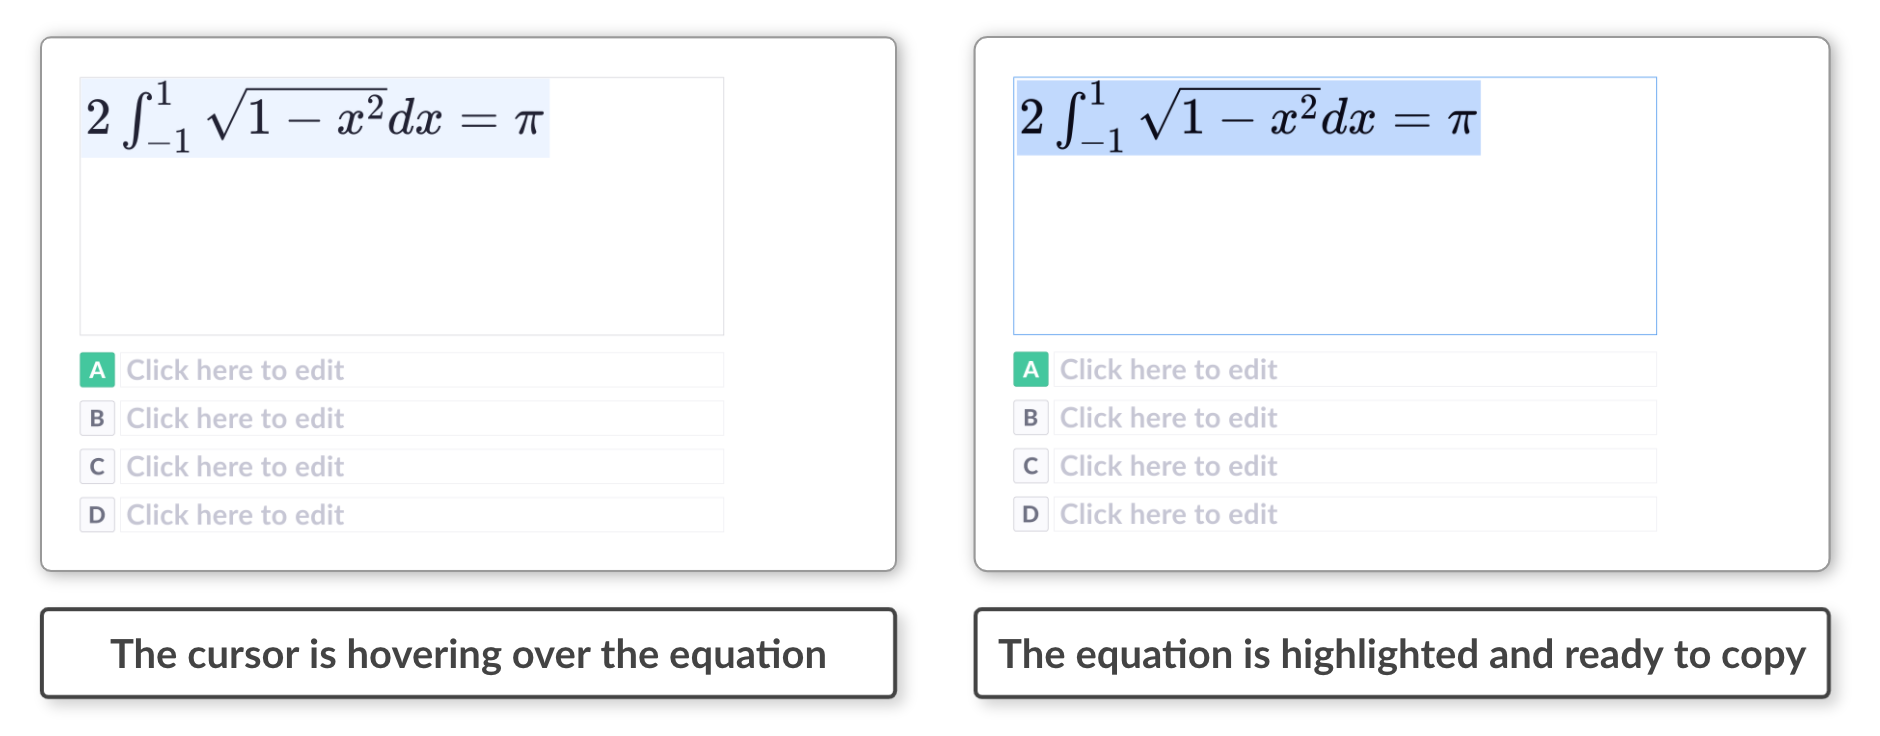 Hovering_vs_Selected_equation.png